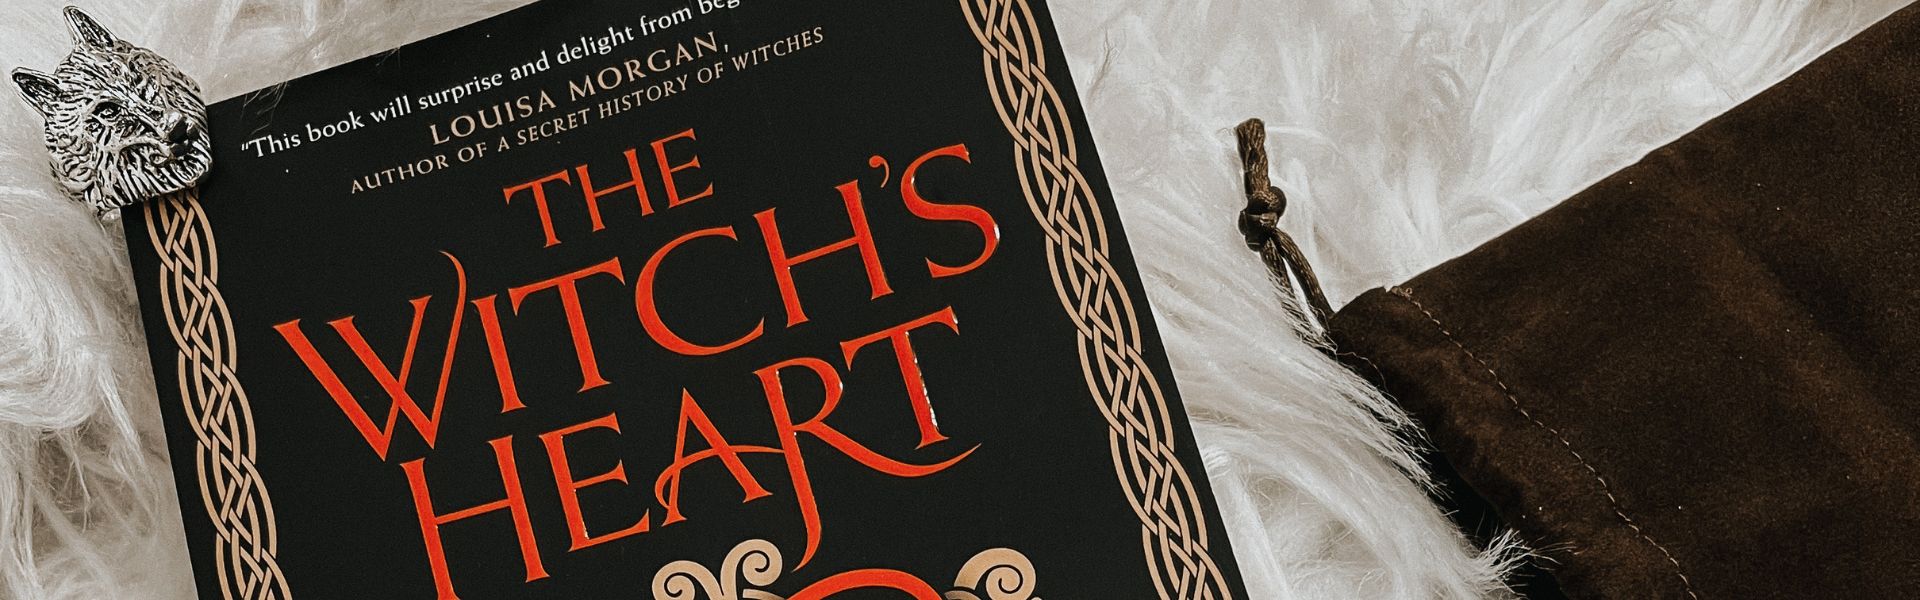 The Witch's Heart by Genevieve Gornichec: A review delving into Angrboda's unique story in Norse myth, merging ancient lore with modern themes.